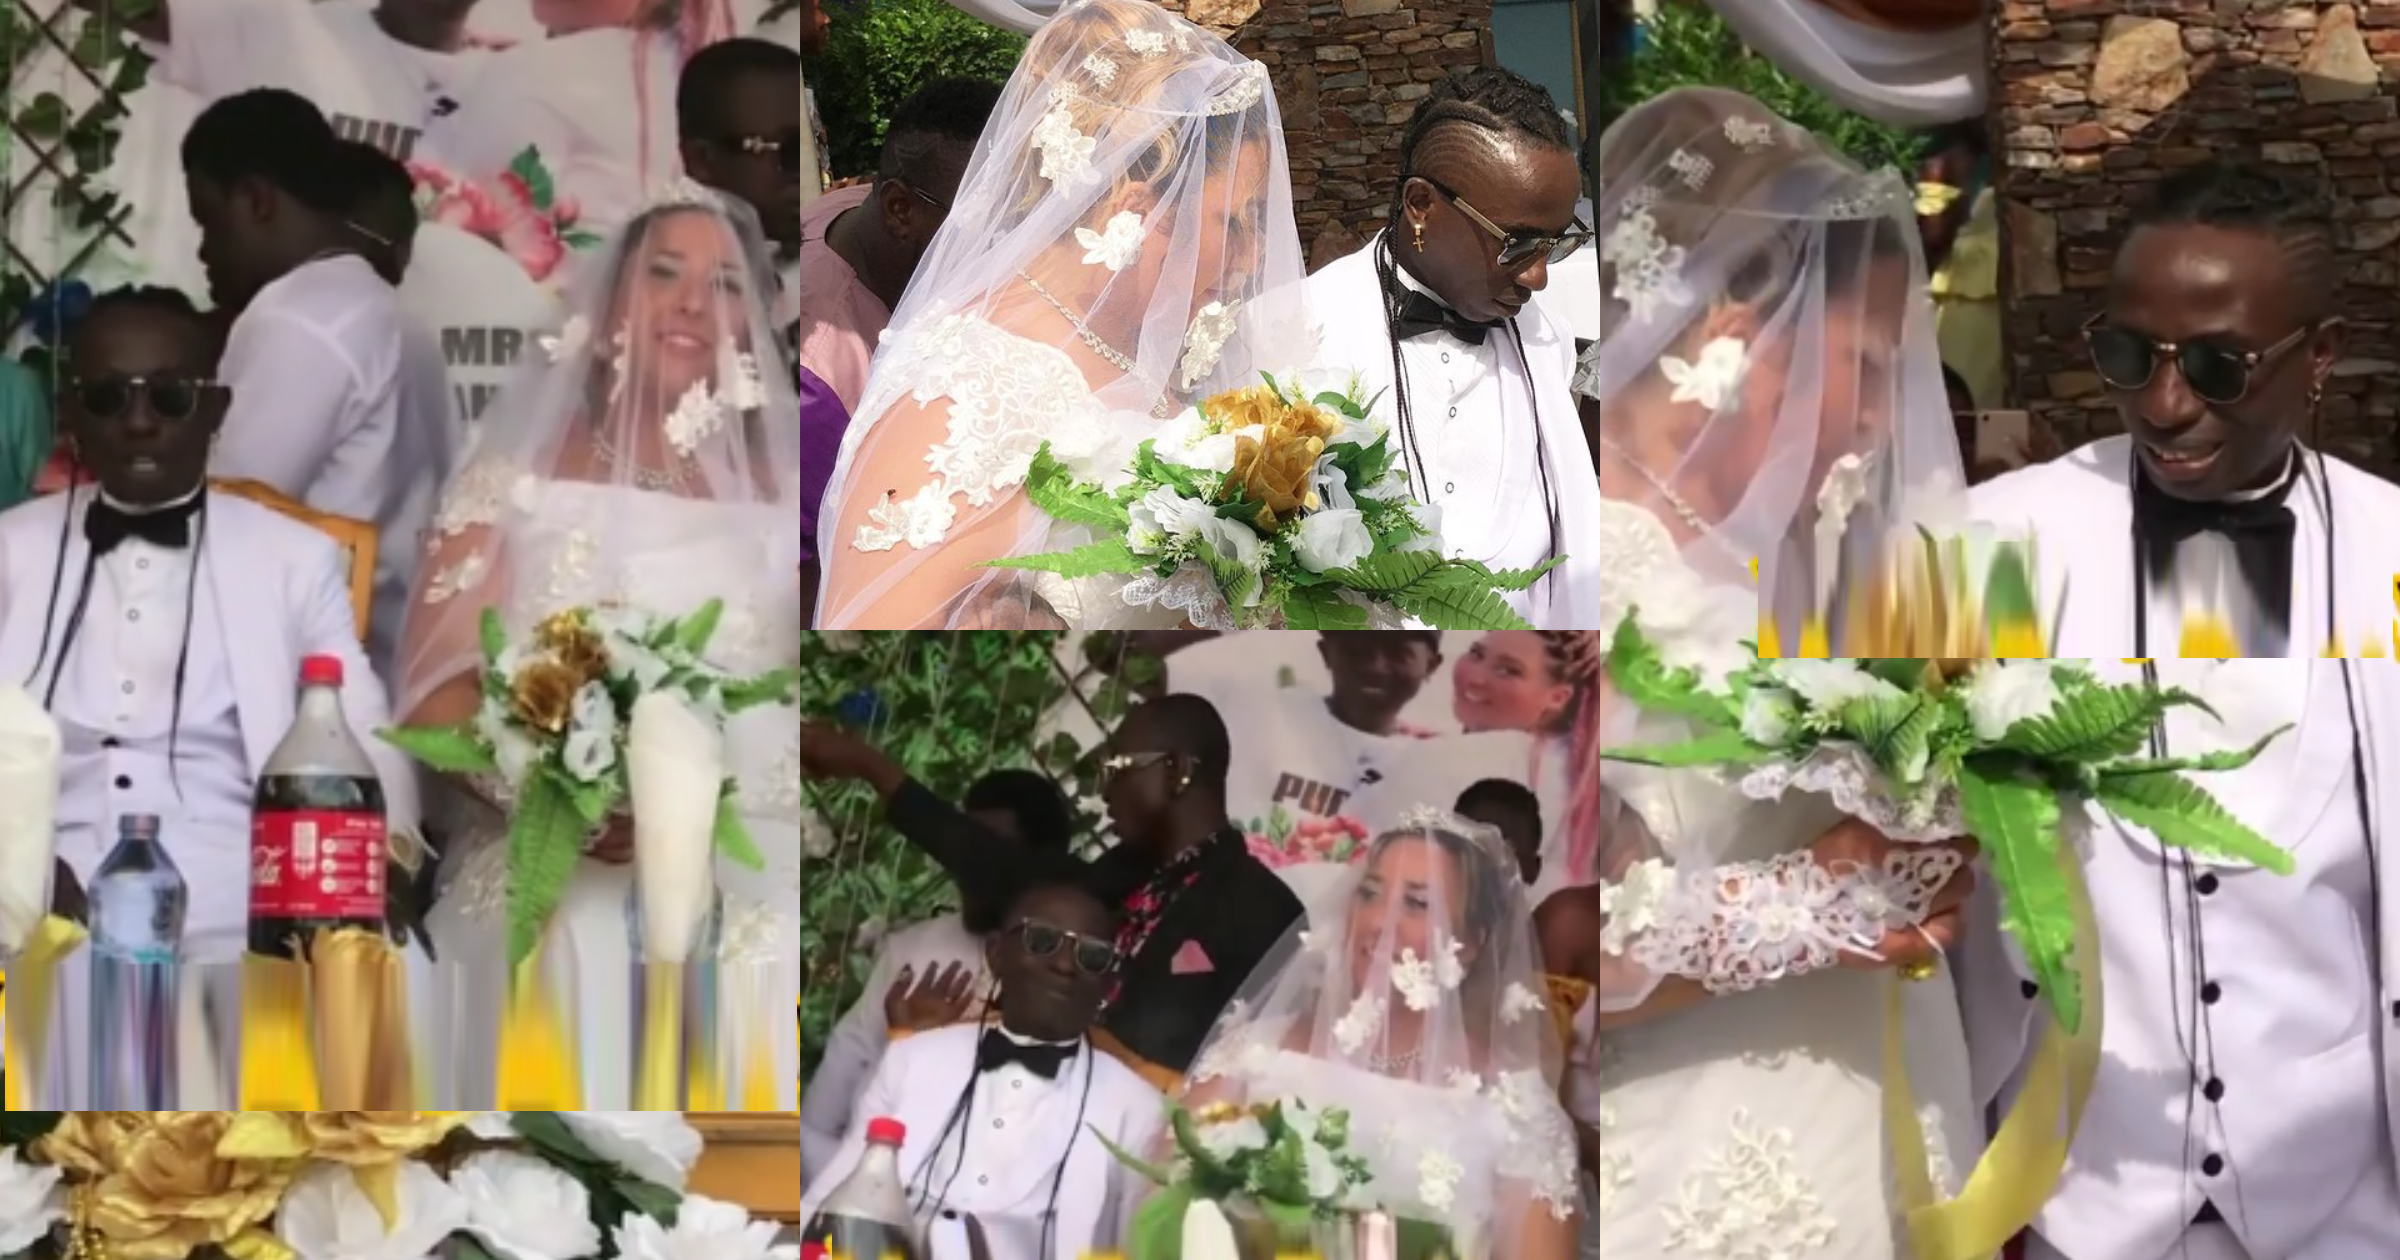 See Patapaa looking dapper in suit as first video and photo from his white wedding pop up